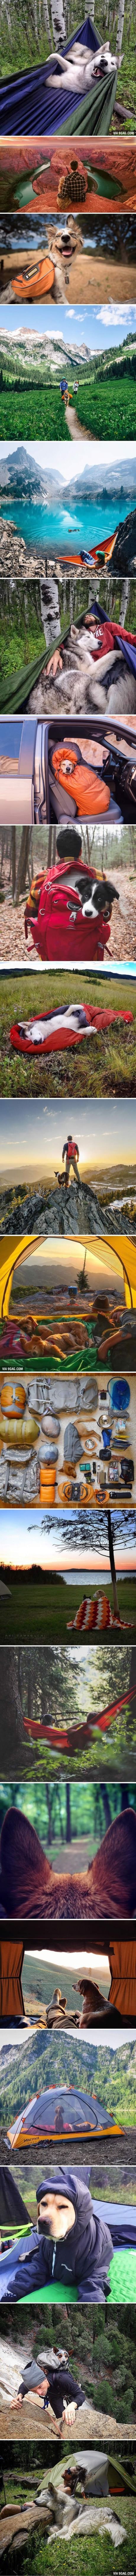 Camping With Dogs Is The Most Wonderful Thing Ever